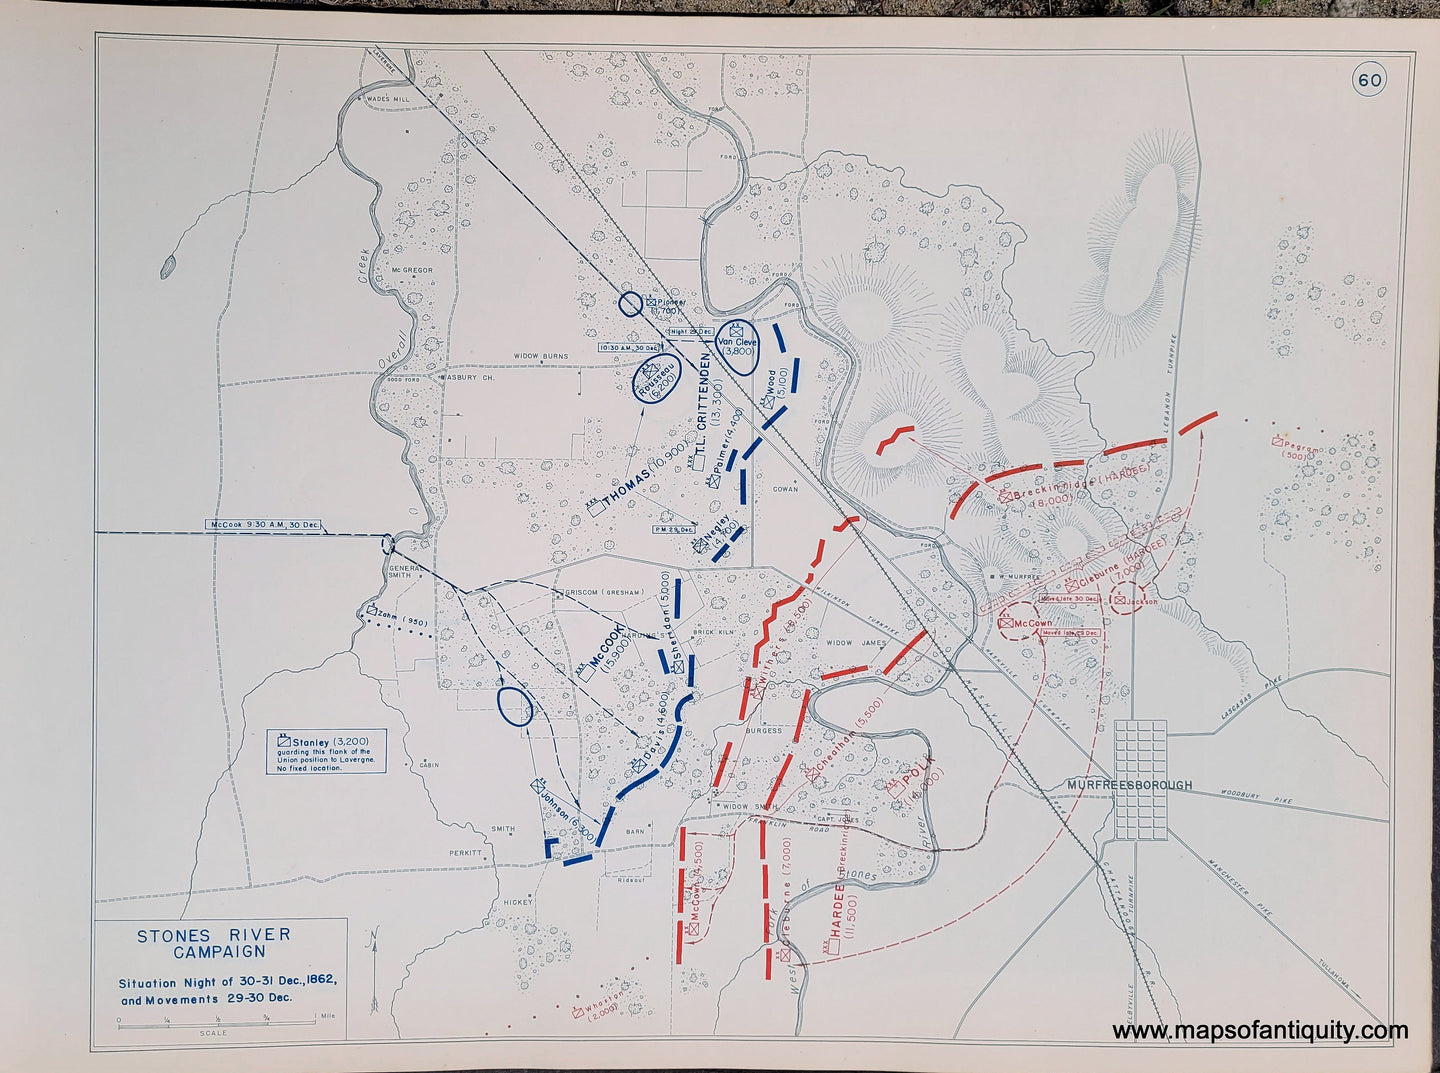 Genuine-Antique-Map-Stones-River-Campaign-Situation-Night-of-30-31-Dec--1862-and-Movements-29-30-Dec--1948-Matthew-Forney-Steele-Dept-of-Military-Art-and-Engineering-US-Military-Academy-West-Point-Maps-Of-Antiquity